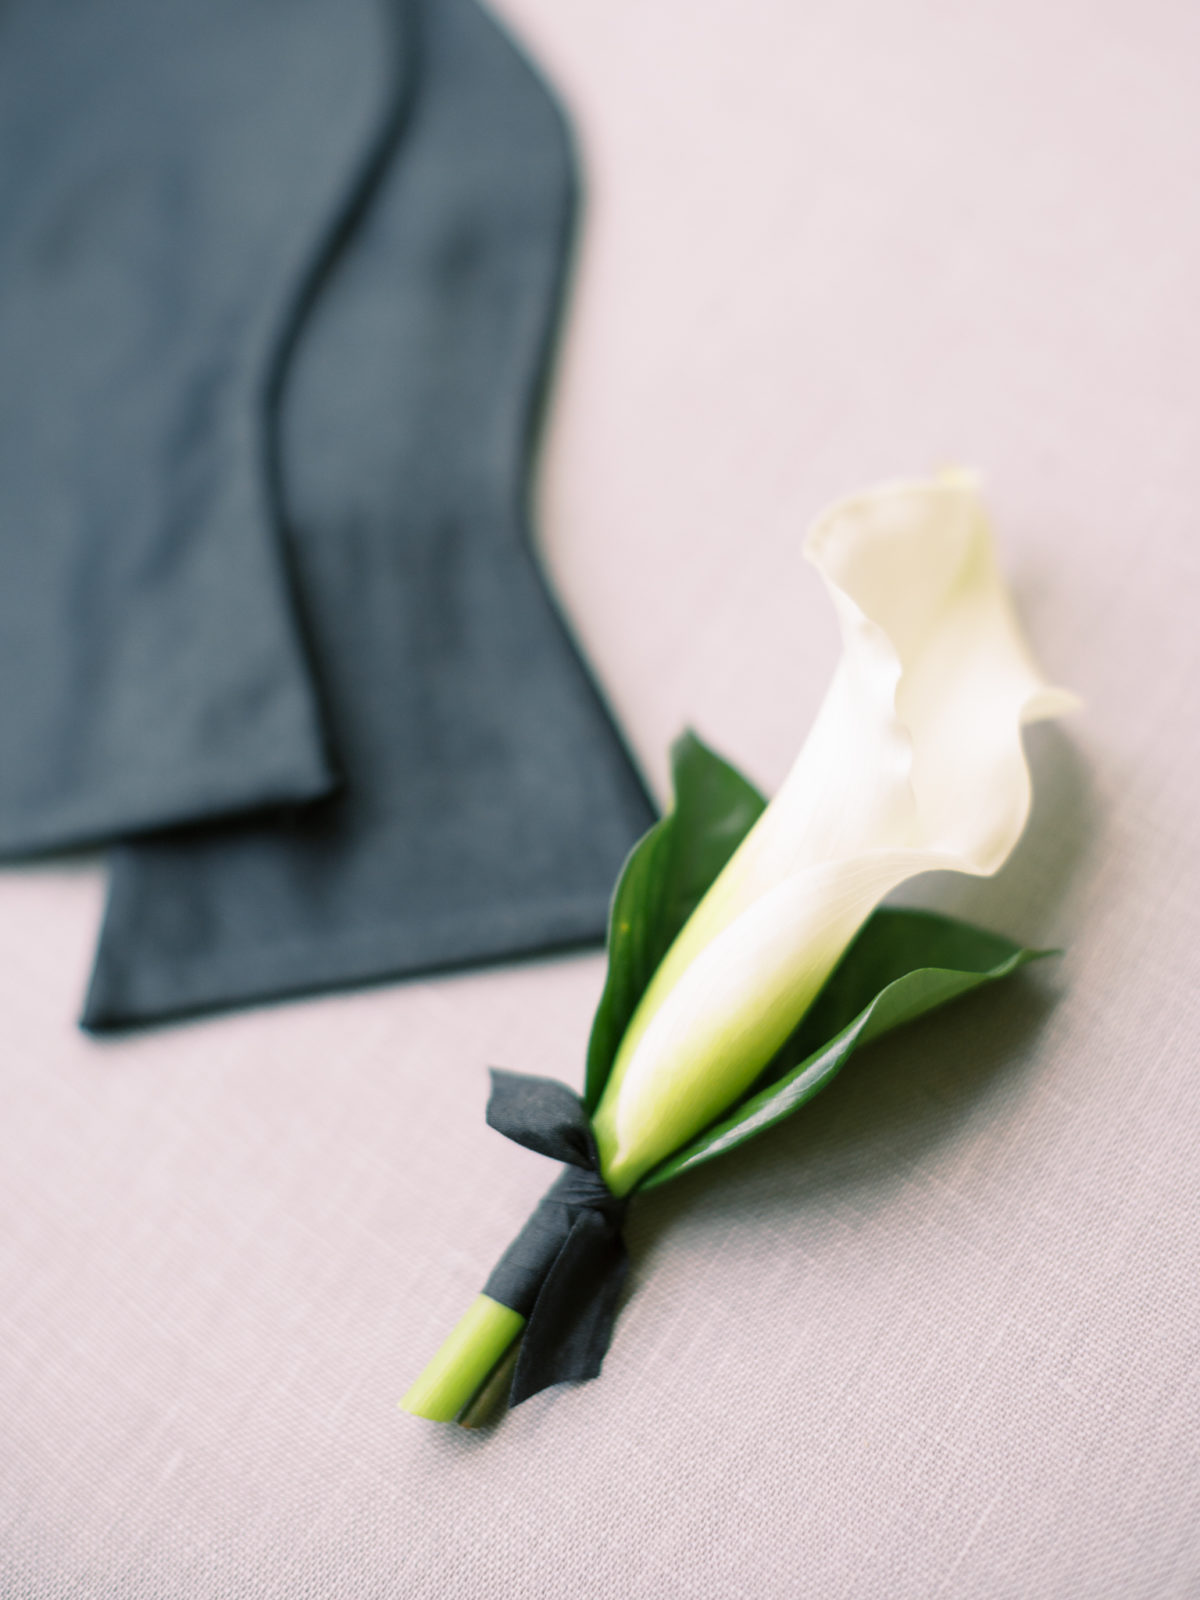 Calla lily wedding boutonniere for formal DC wedding.